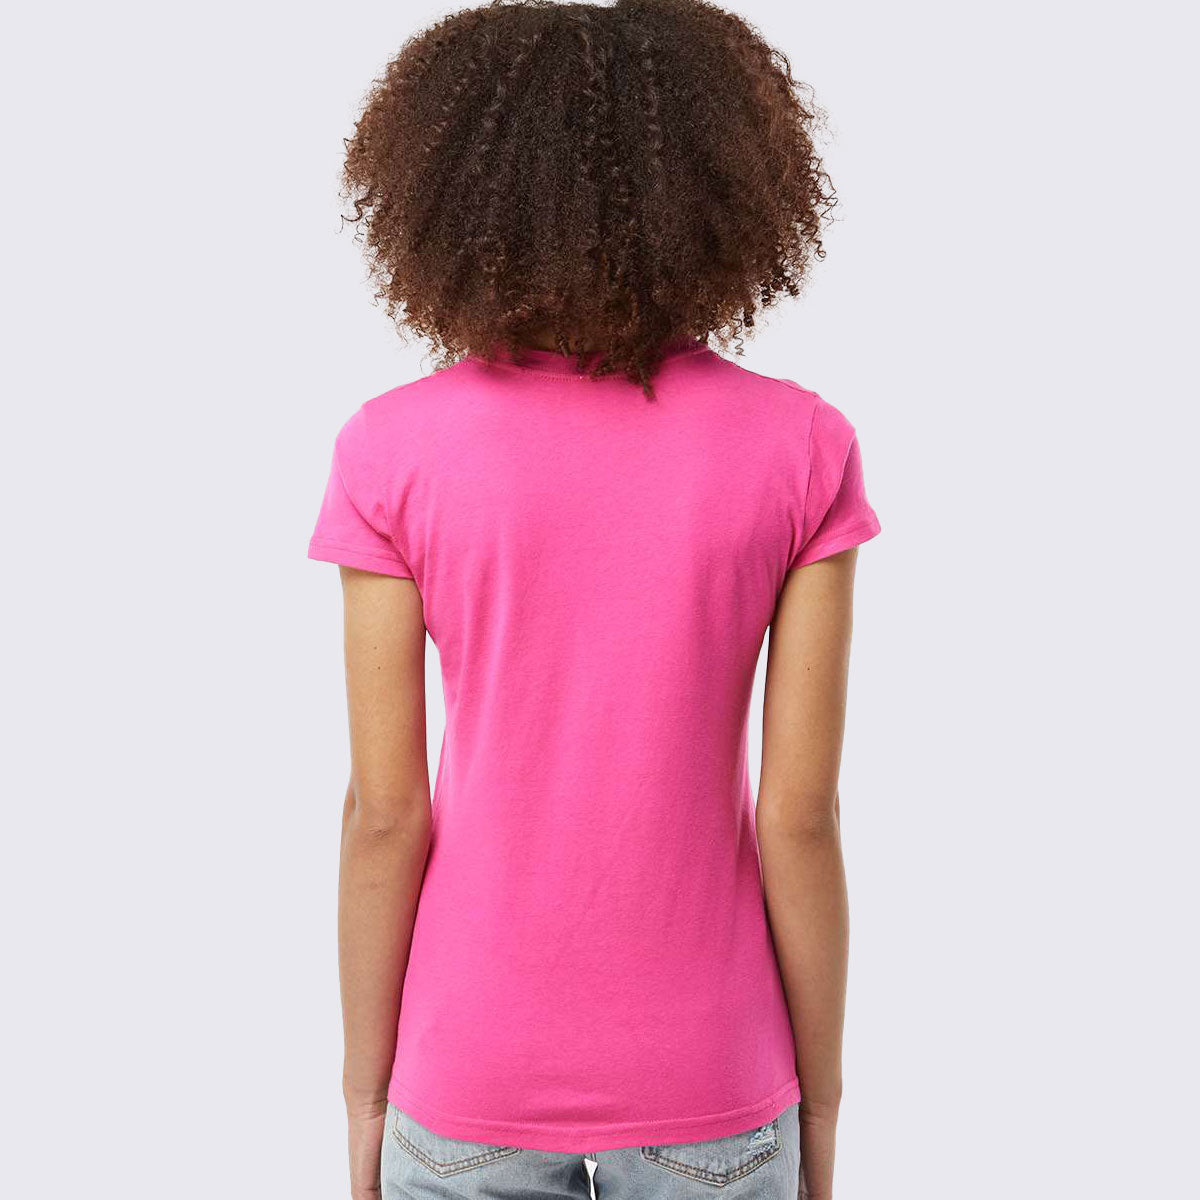 Women’s Fitted Tees, 3 pack